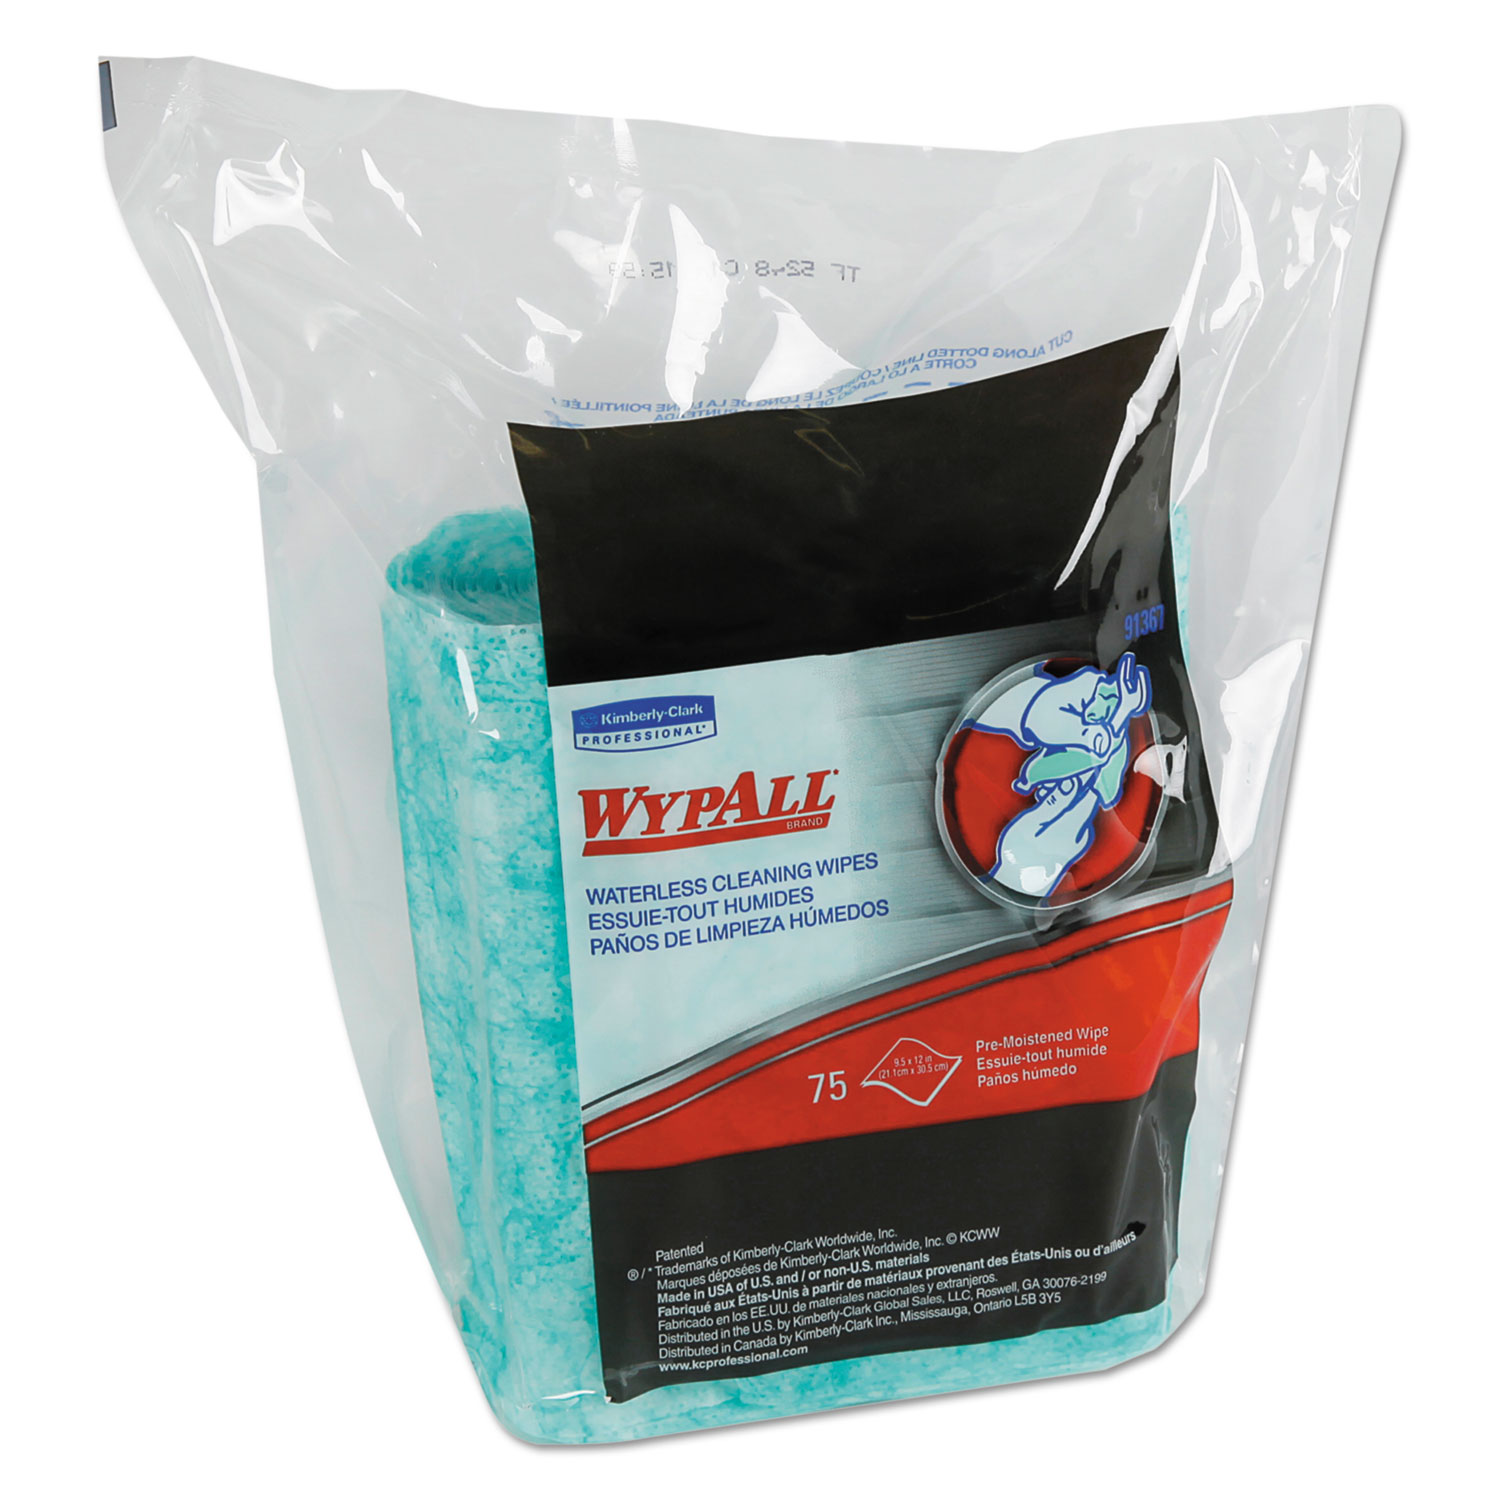  WypAll KCC 91367 Waterless Cleaning Wipes Refill Bags, 12 x 9, 75/Pack (KCC91367CT) 